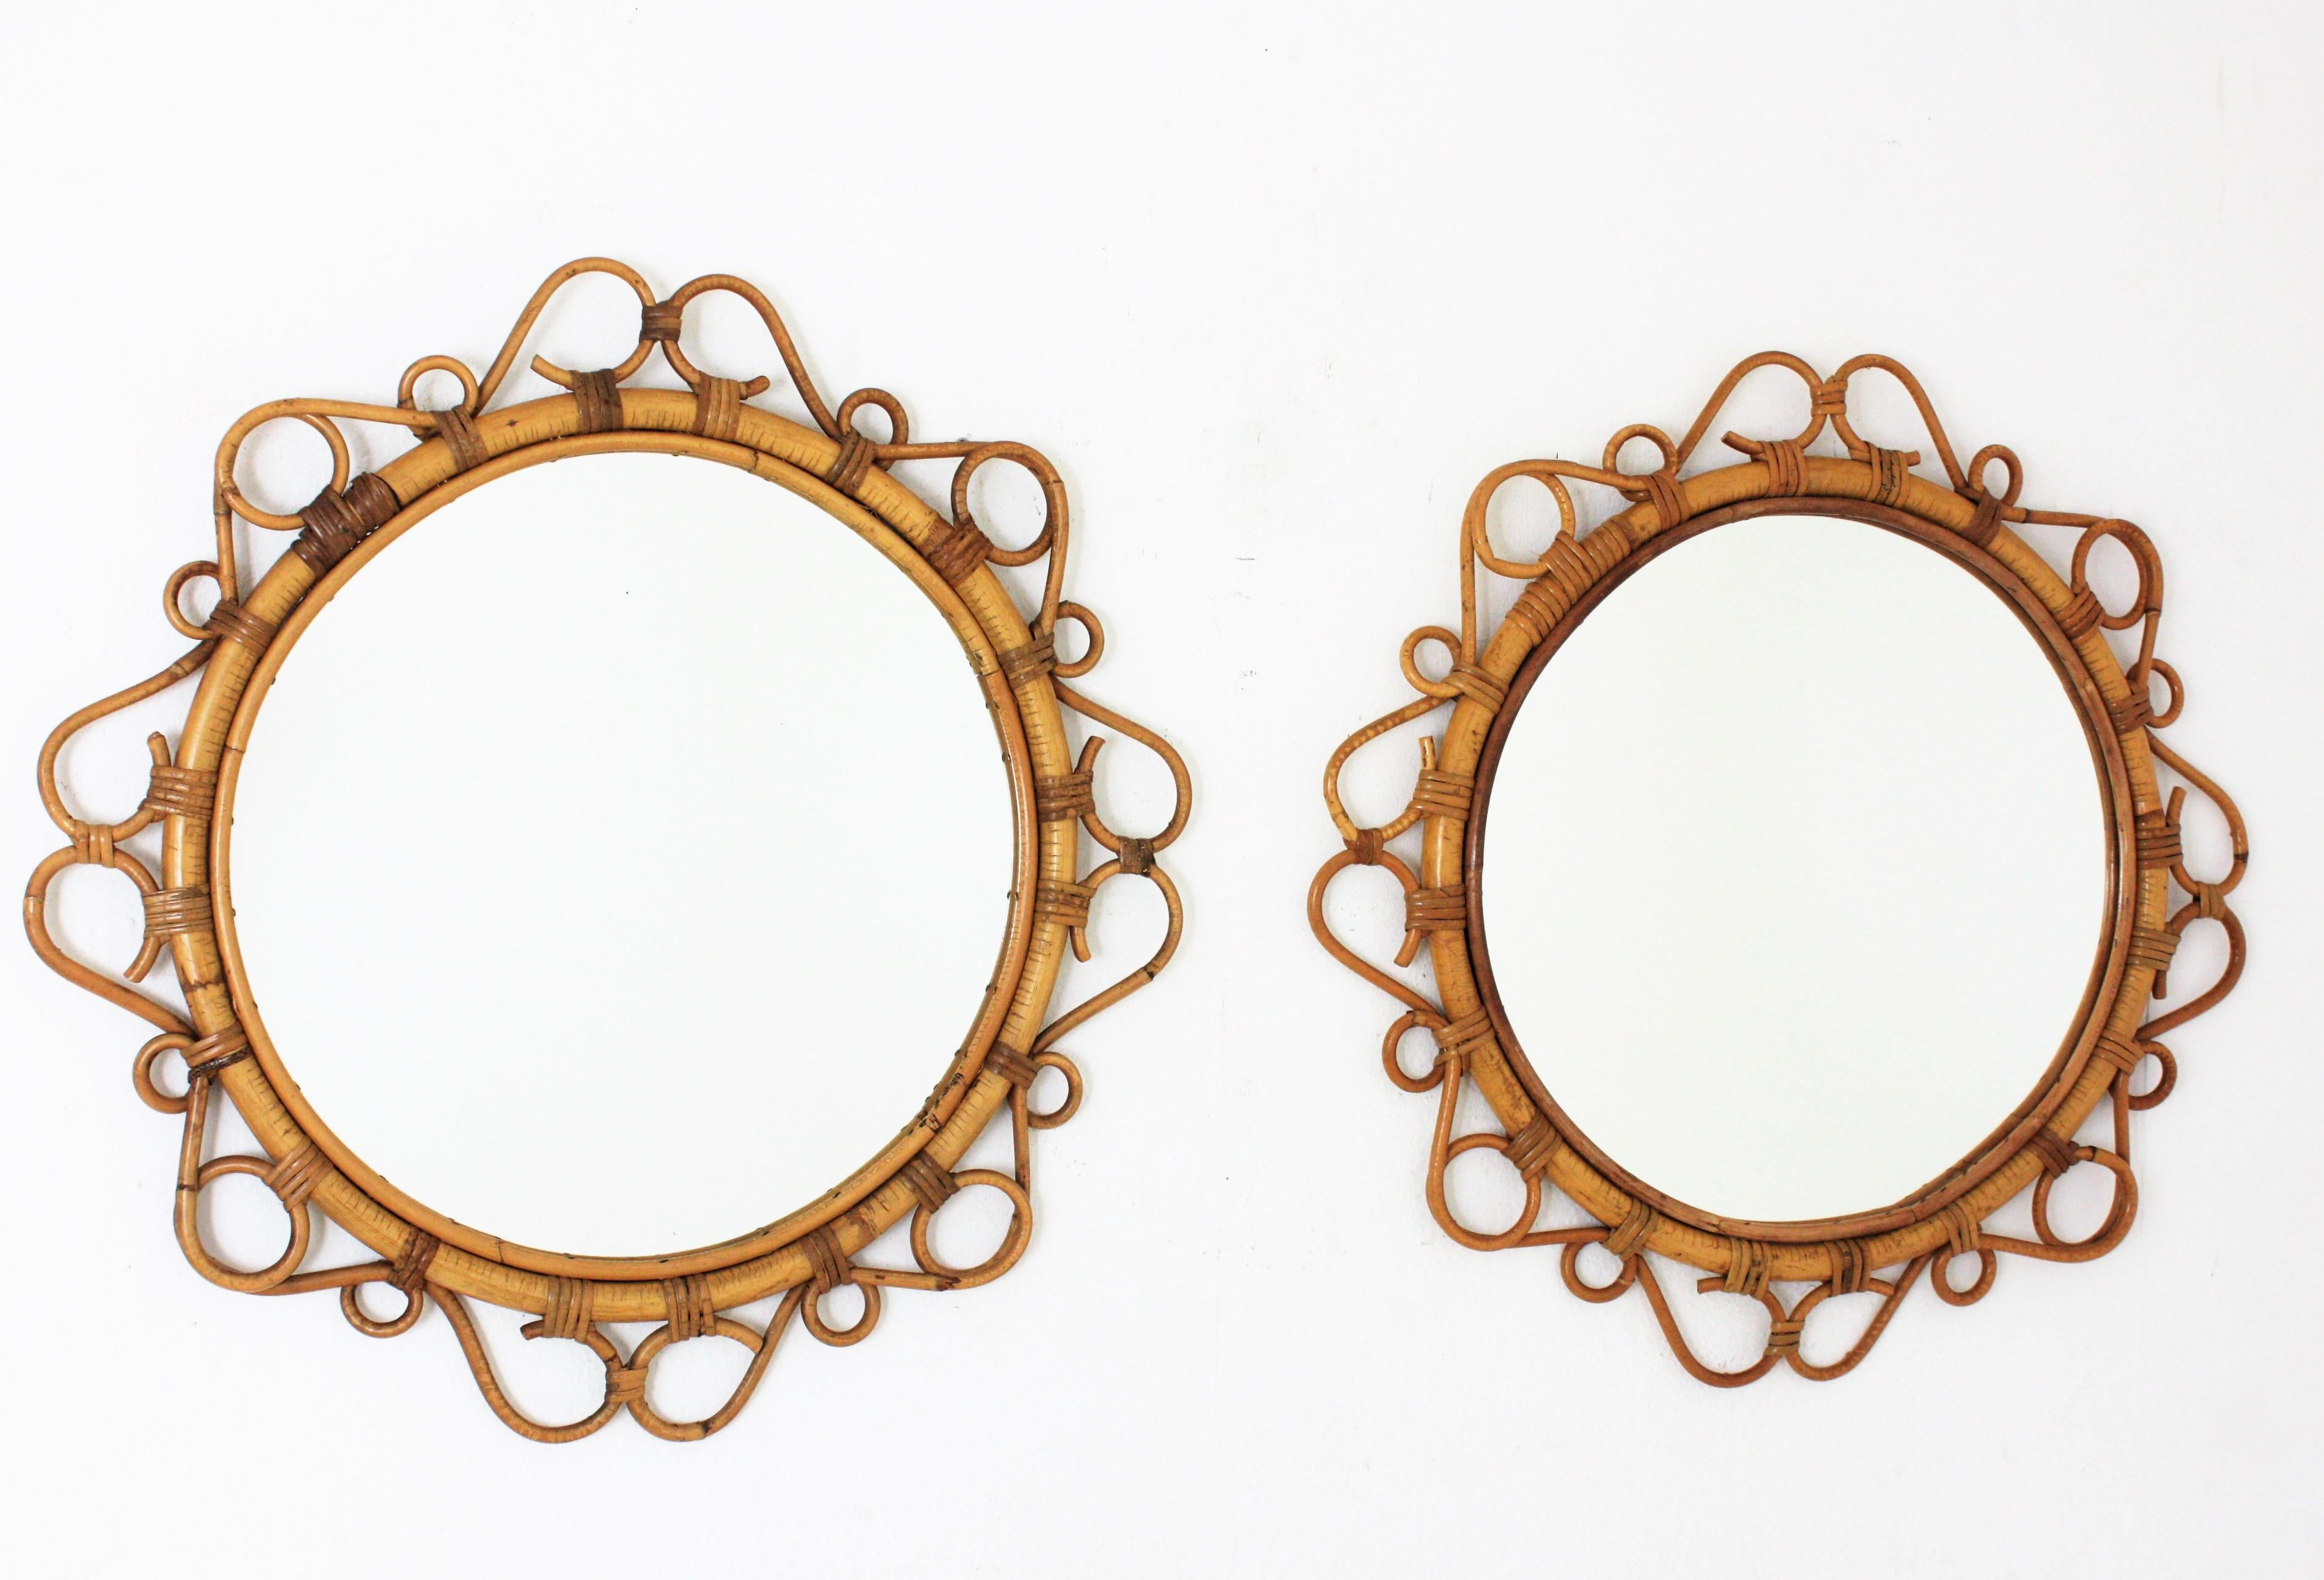 A pair of eye-catching handcrafted bamboo and rattan mirrors with scroll detailings surrounding the frame, Spain, 1960s. 
These Mediterranean wall mirrors feature a circular bamboo frame surrounded by rattan scroll and circle decorations.
They